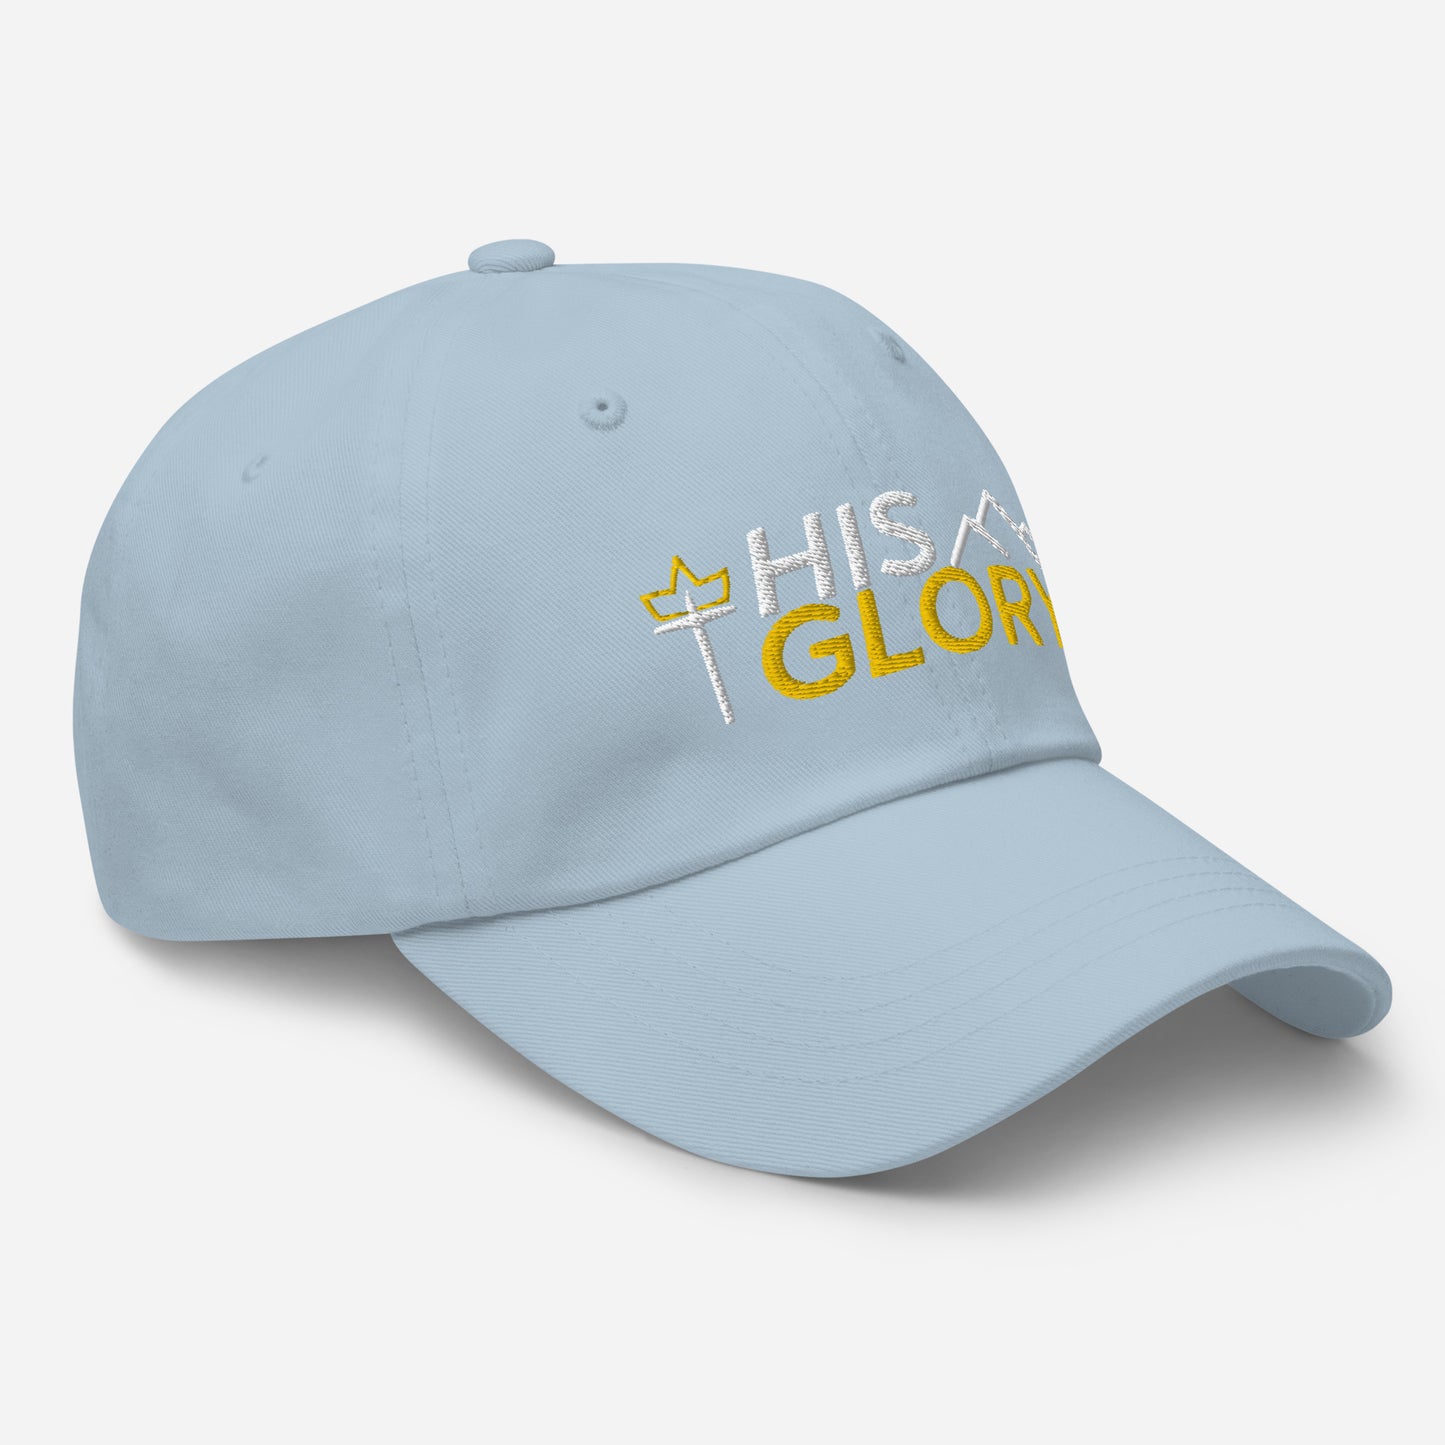 His Glory - 3.0 - NEW - Dad hat